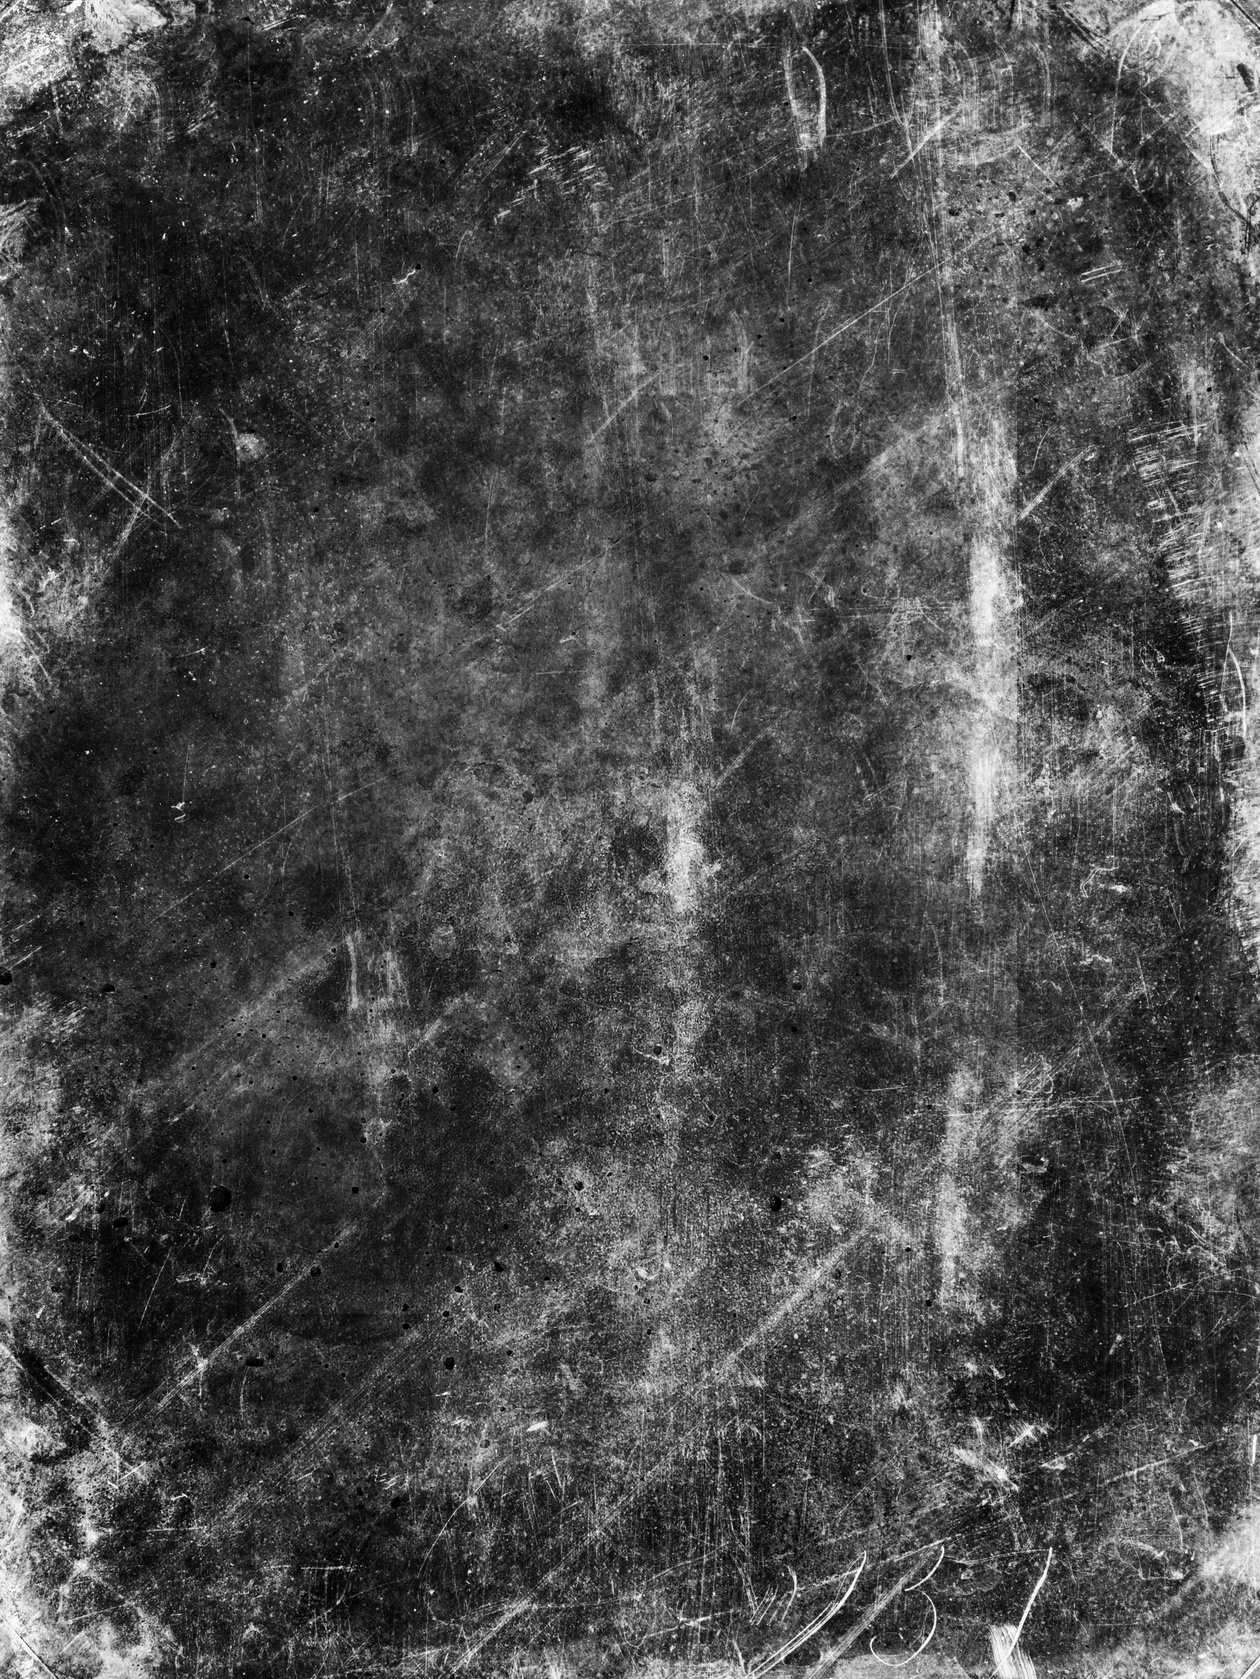 Black And White Grunge Texture Photoshop Textures Brushlovers Com